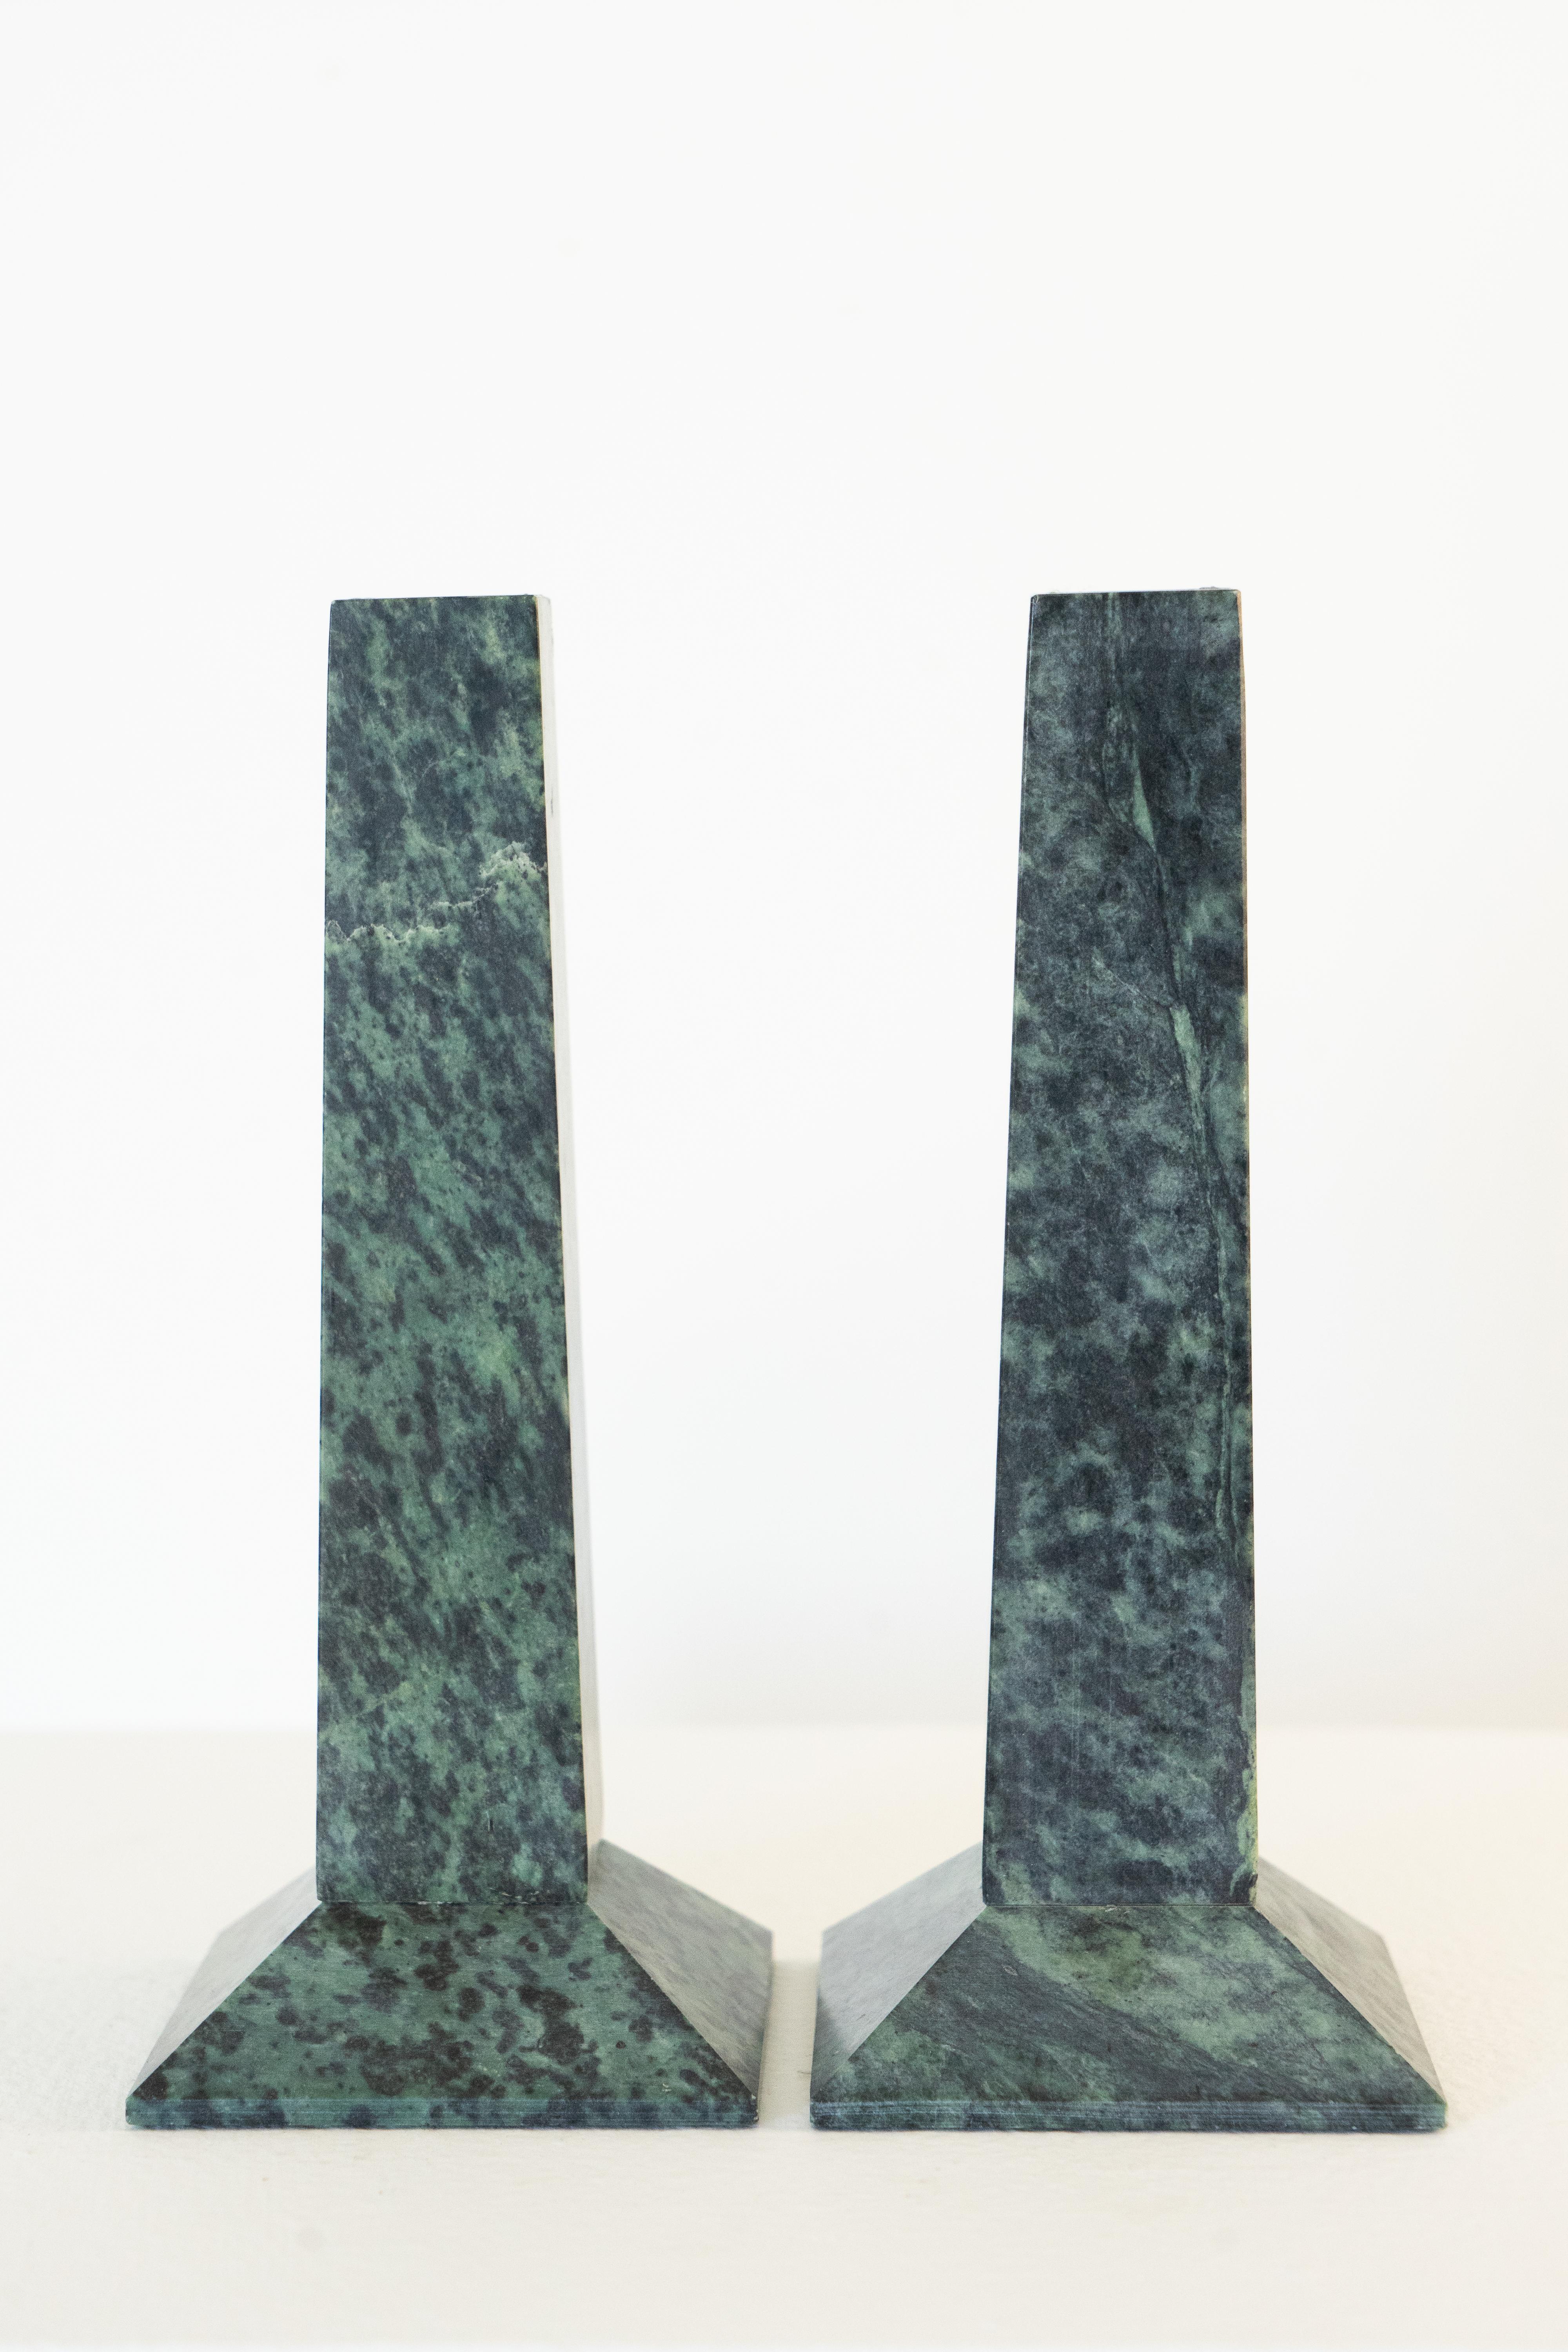 Italian Green Marble Architectural Candle Holders Circa 1980s For Sale 4